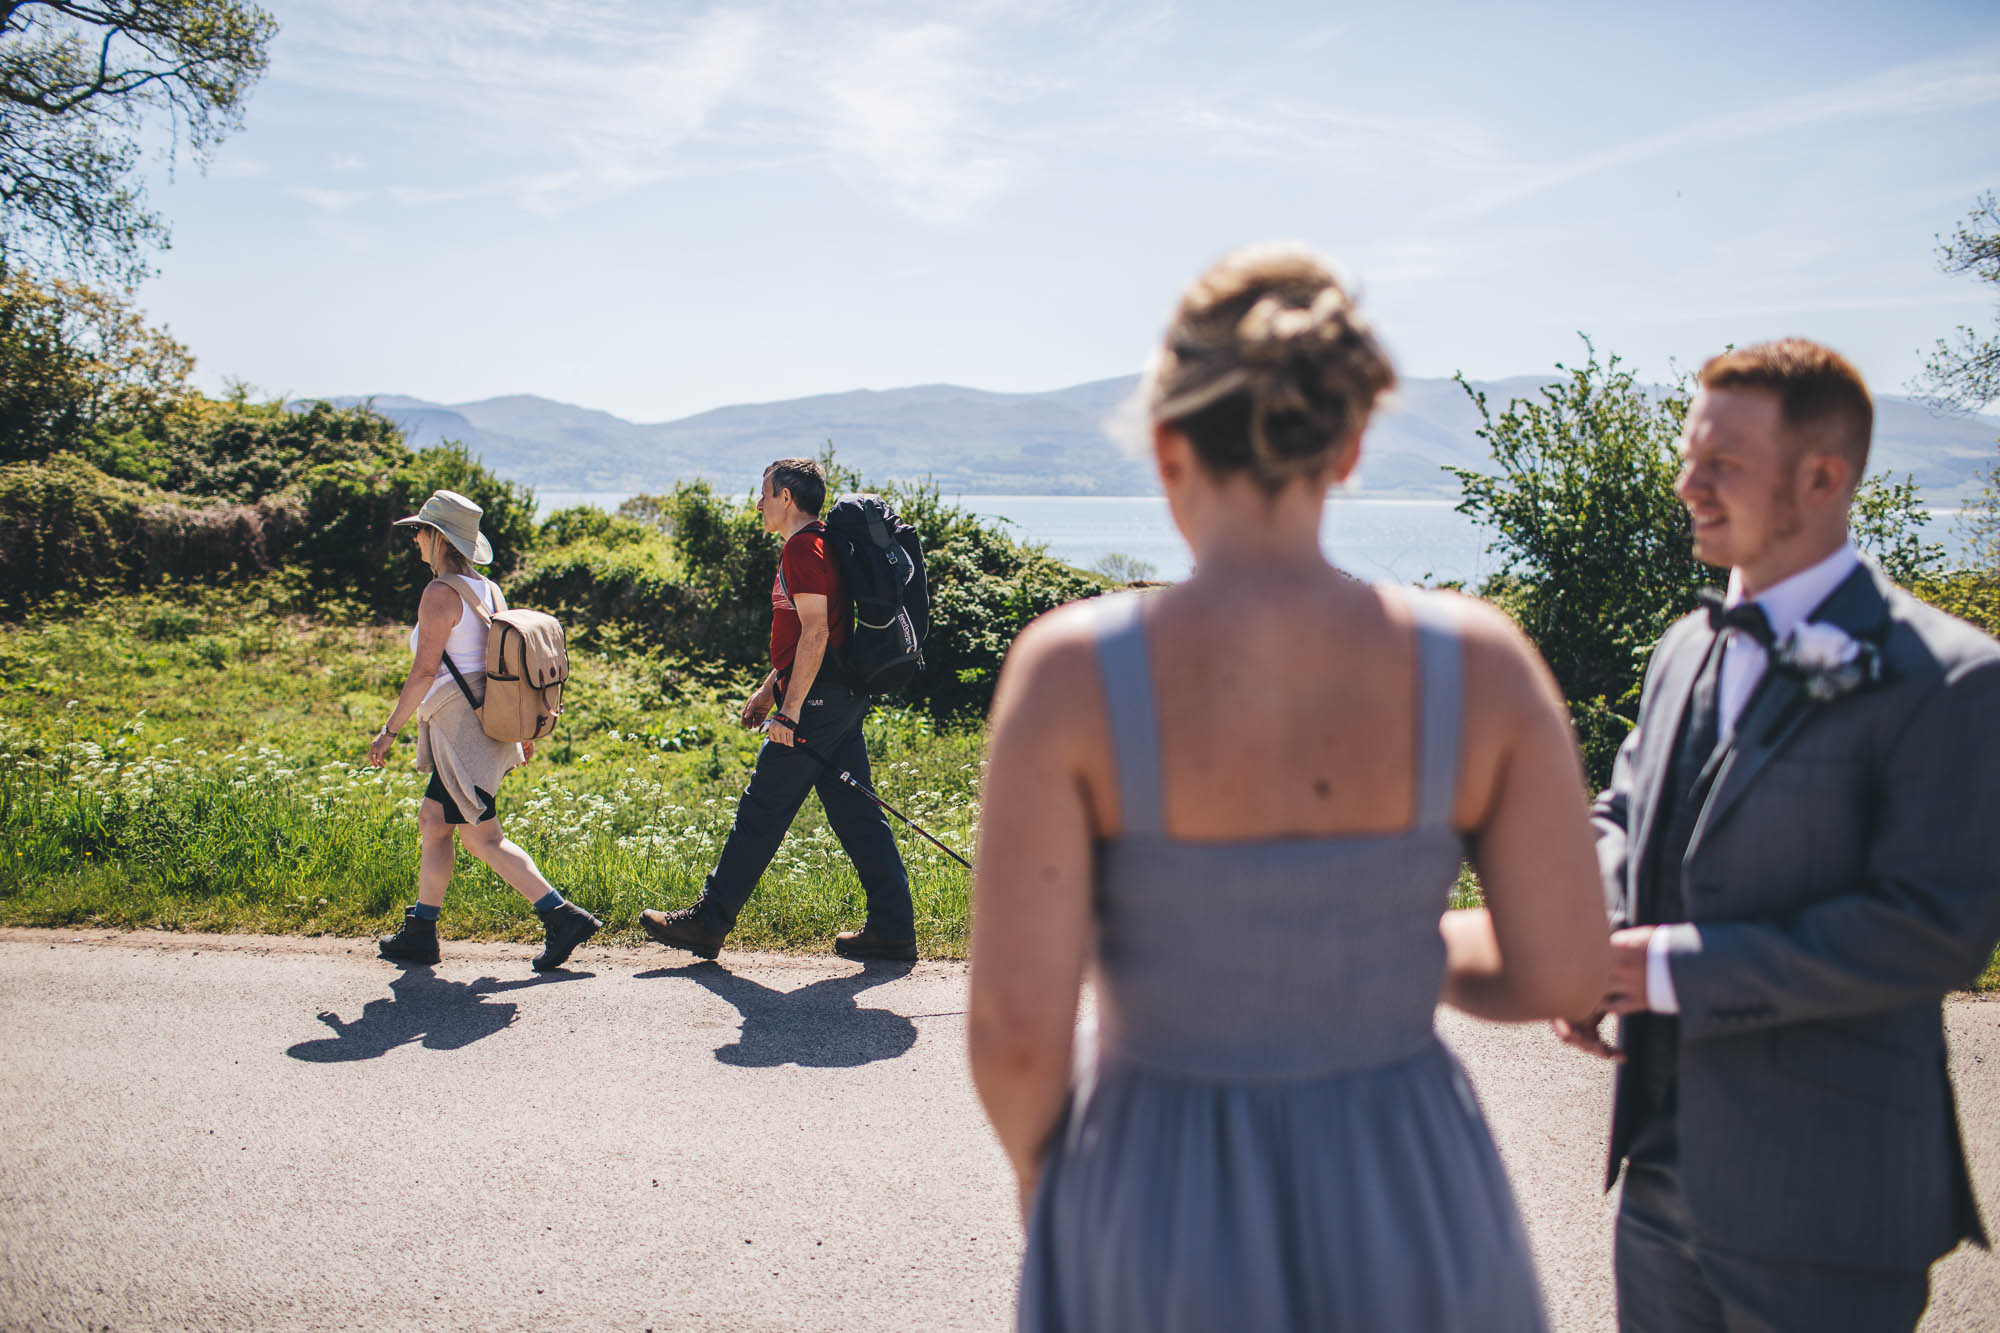 Wedding Guests watch members of public walk past on a hike with Anglesey coastline in background as they wait for Bride and Groom to arrive